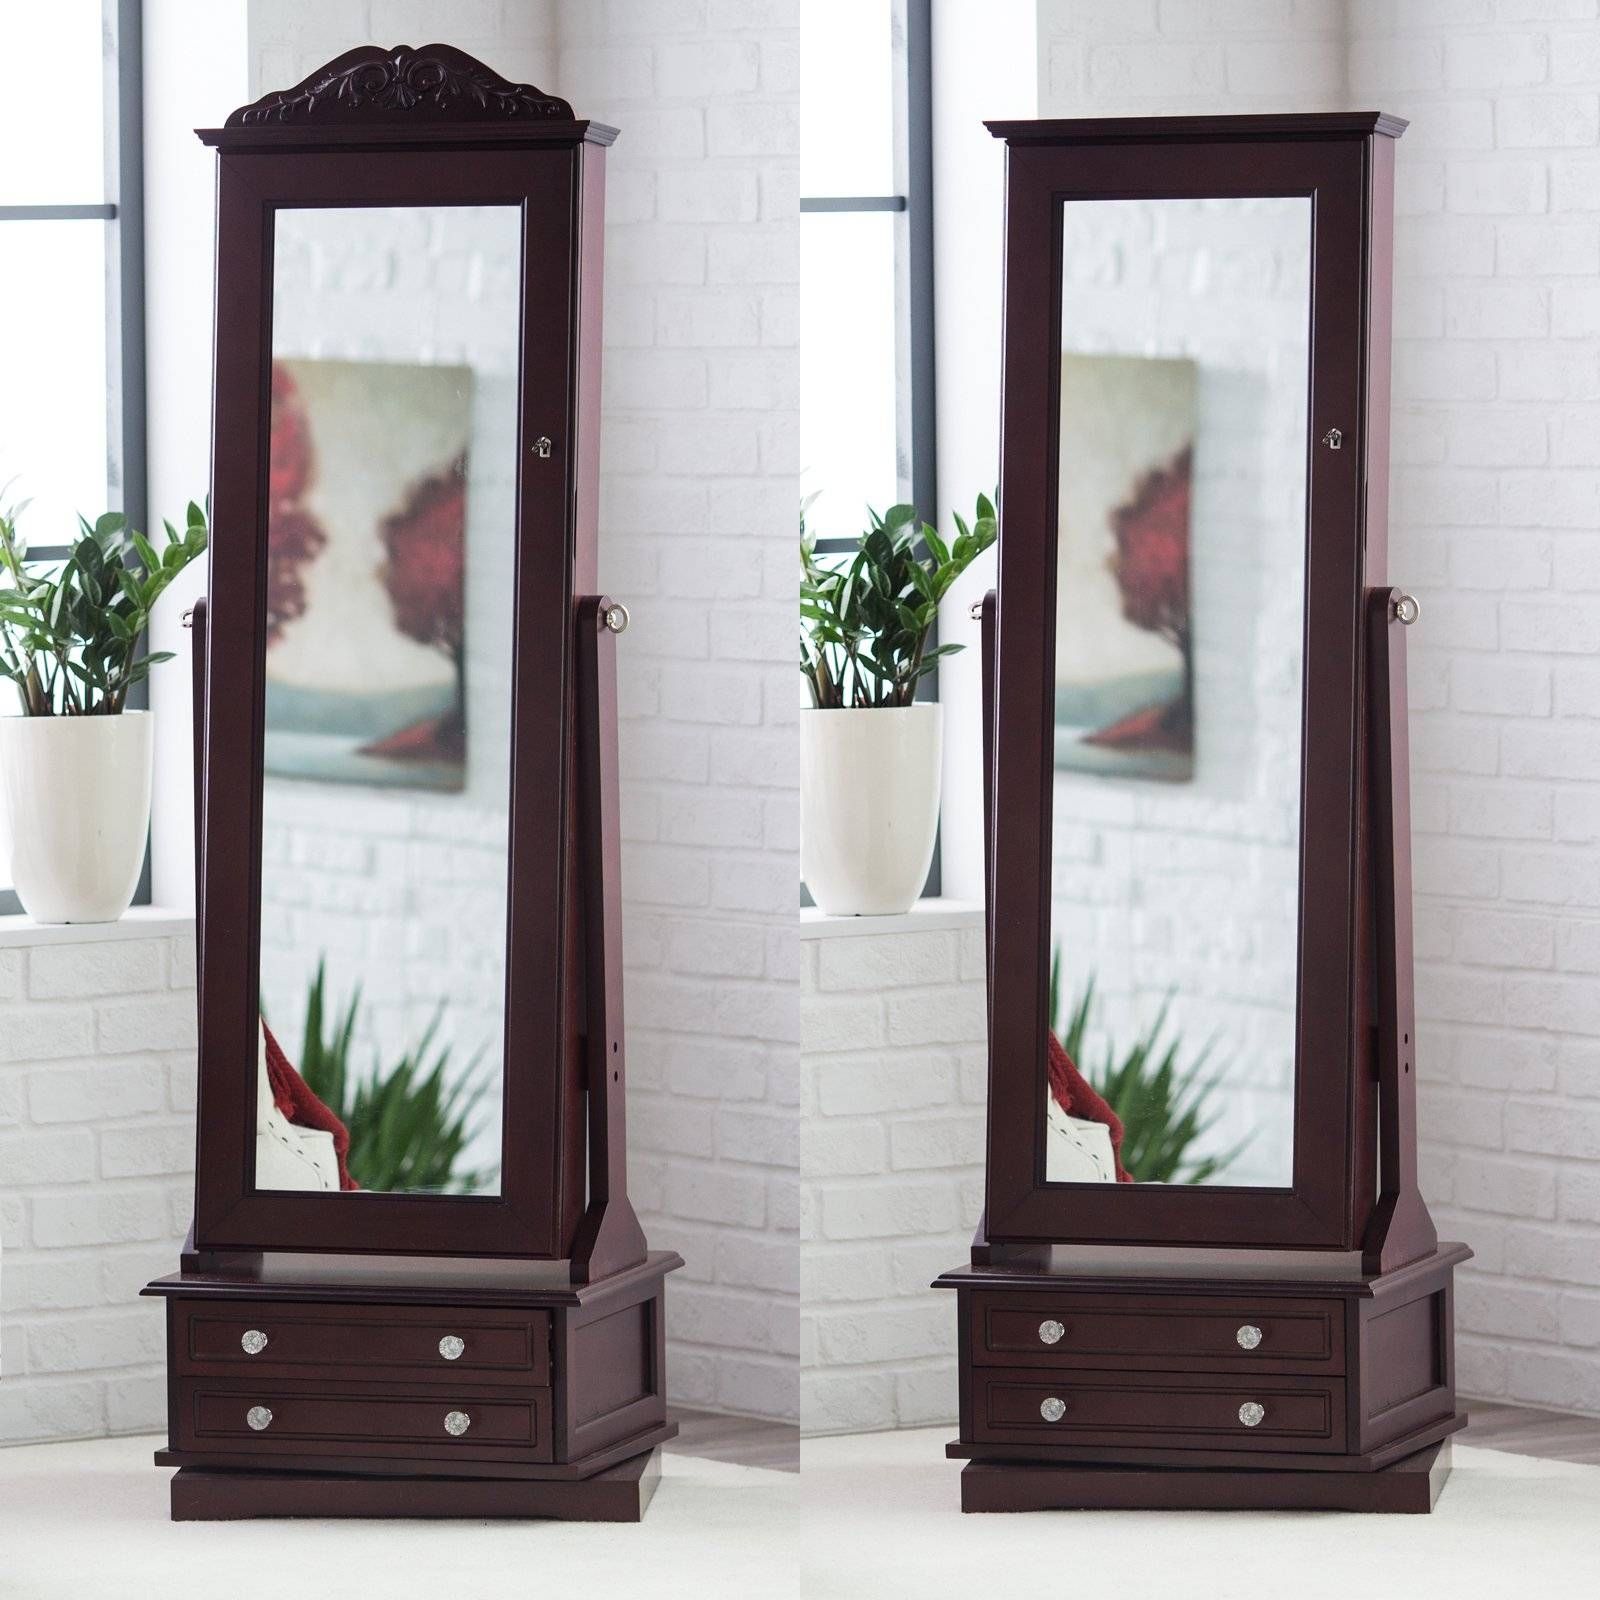 Belham Living Swivel Cheval Mirror Jewelry Armoire | Hayneedle With Full Length Cheval Mirrors (View 20 of 25)